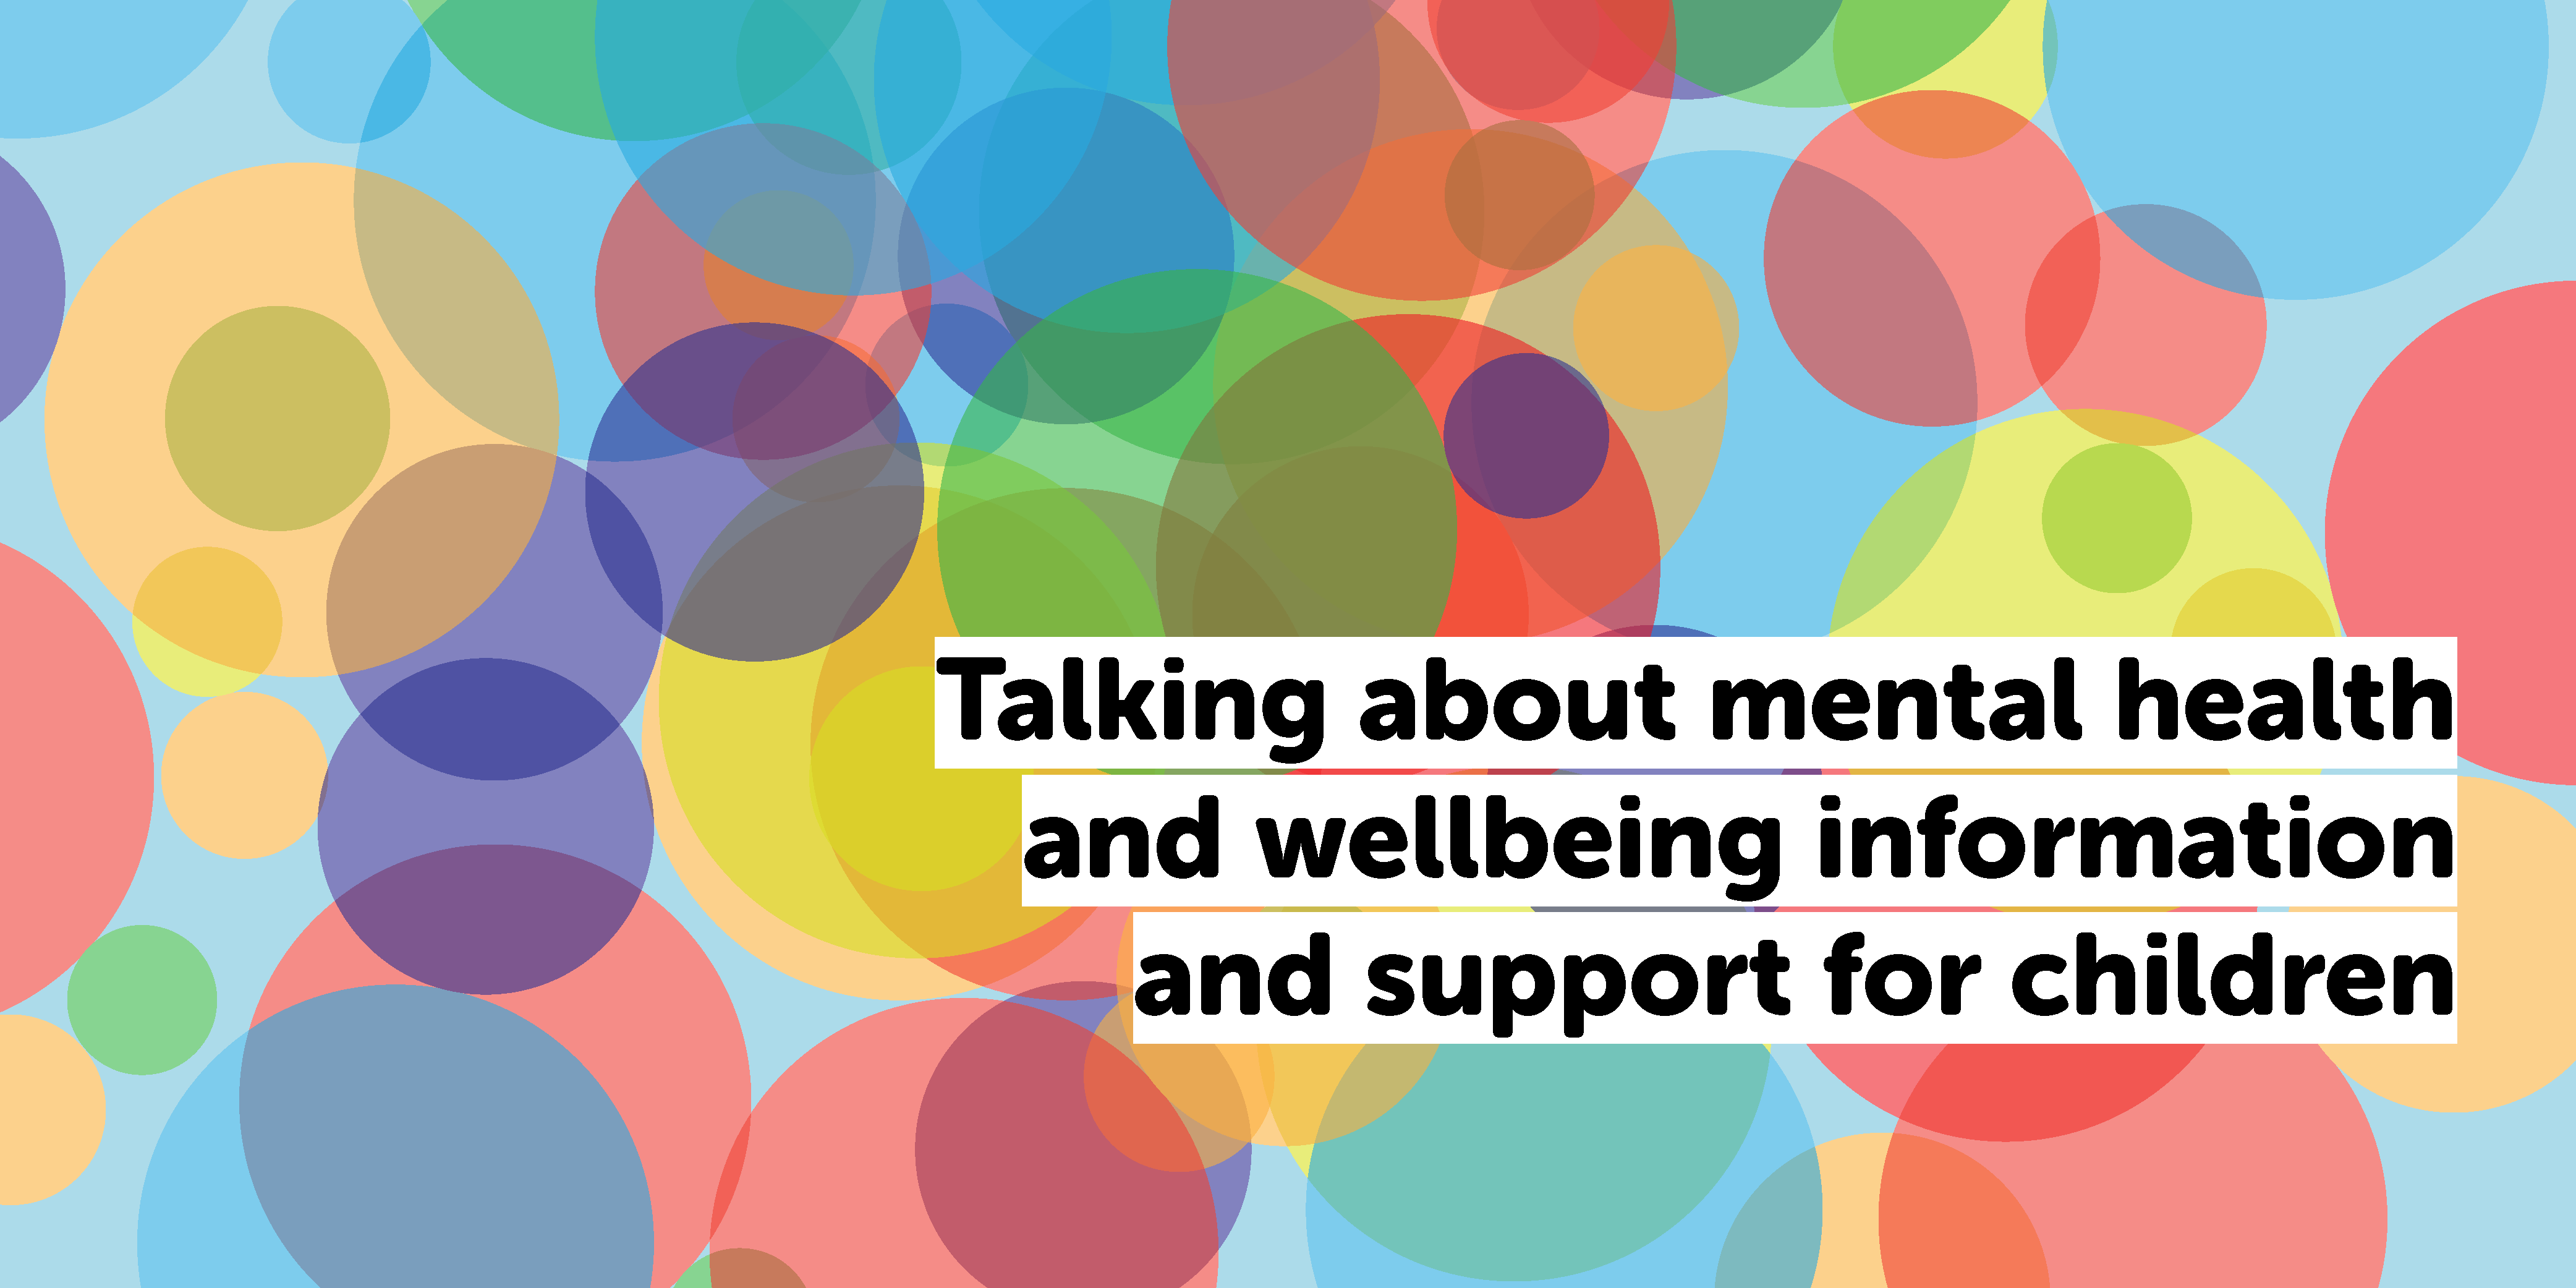 Talking about mental health and wellbeing information and support for children (Slider-Image)